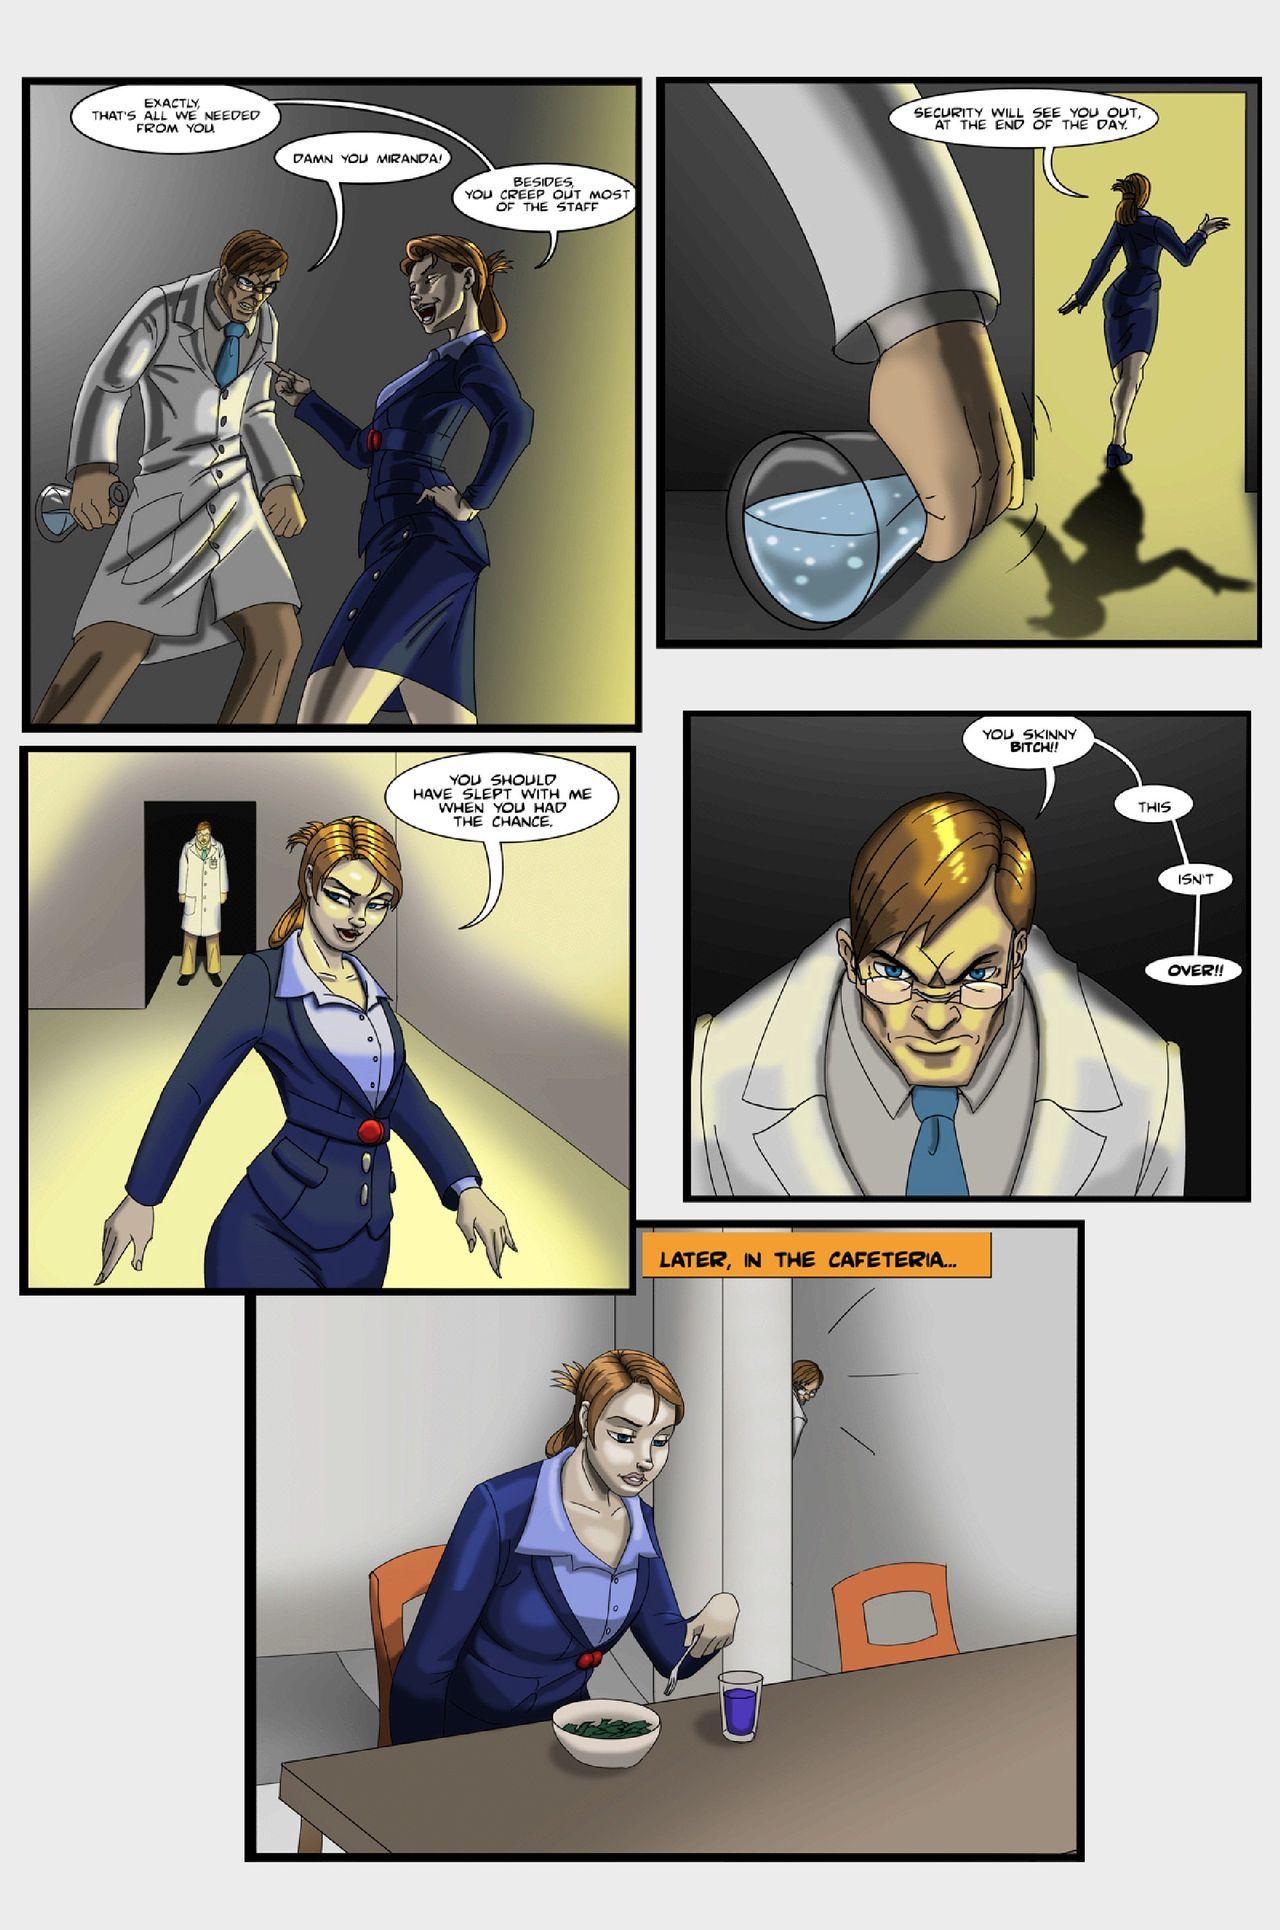 Blueberry Vengeance by LordAltros page 3